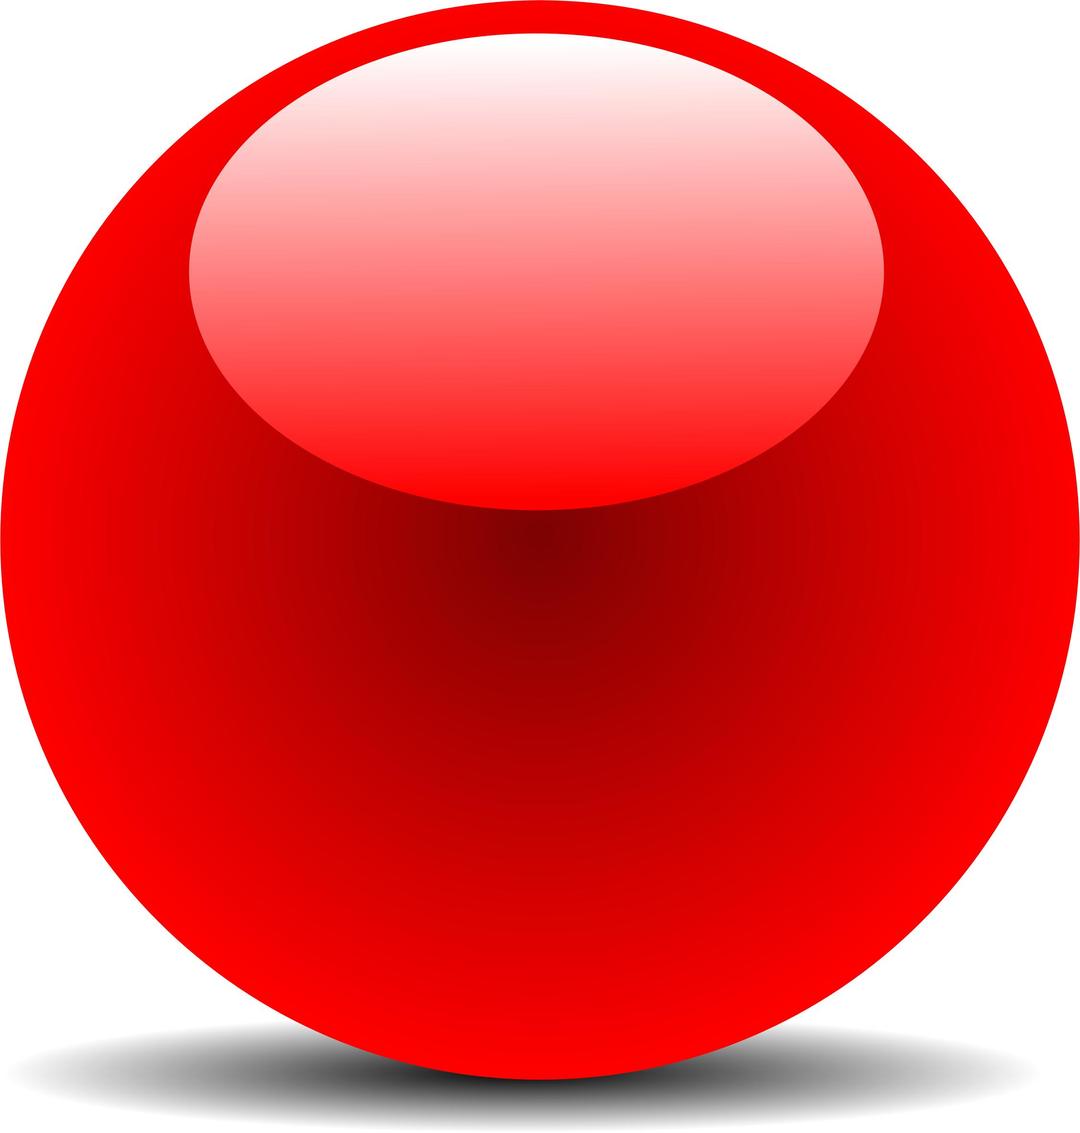 Red Chrome Button png transparent